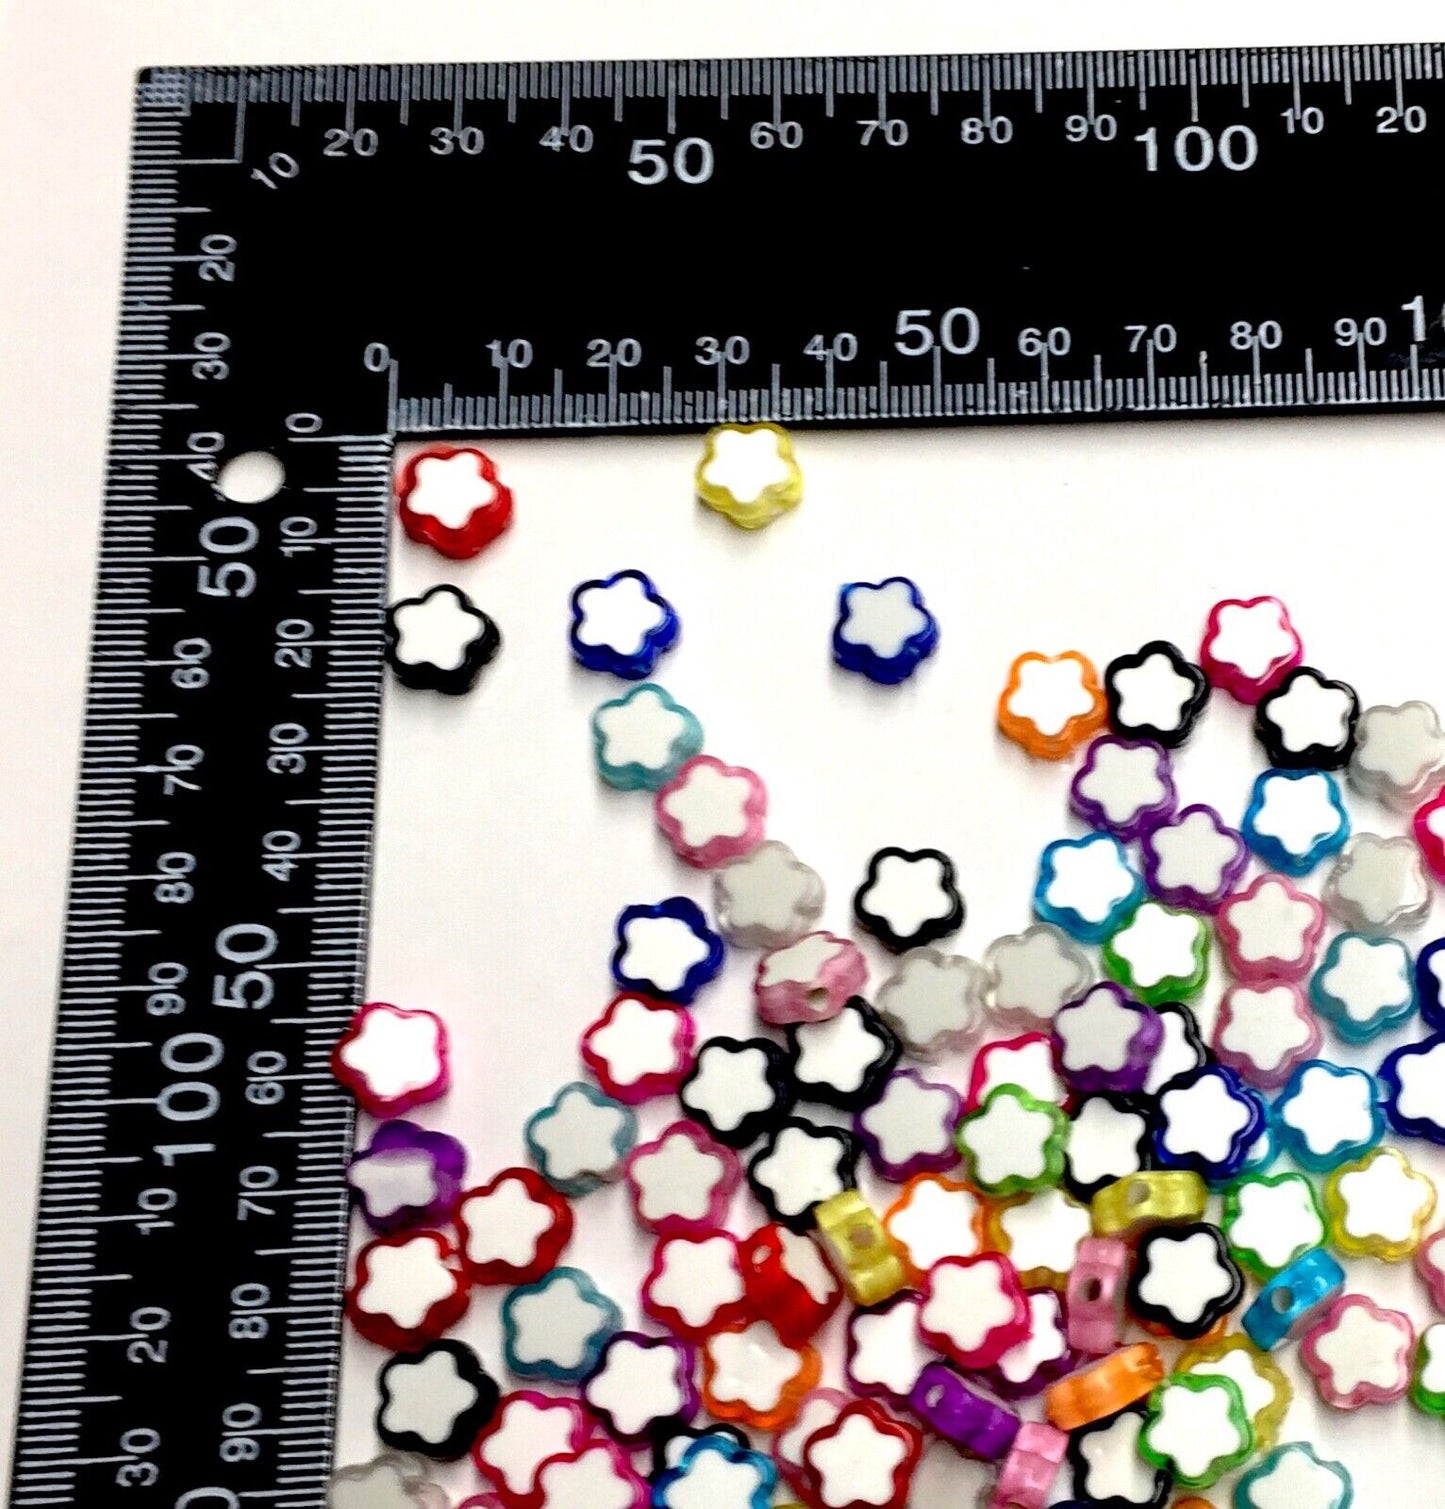 100x Mix Coloured Star Shaped Beads - Pick Your Style